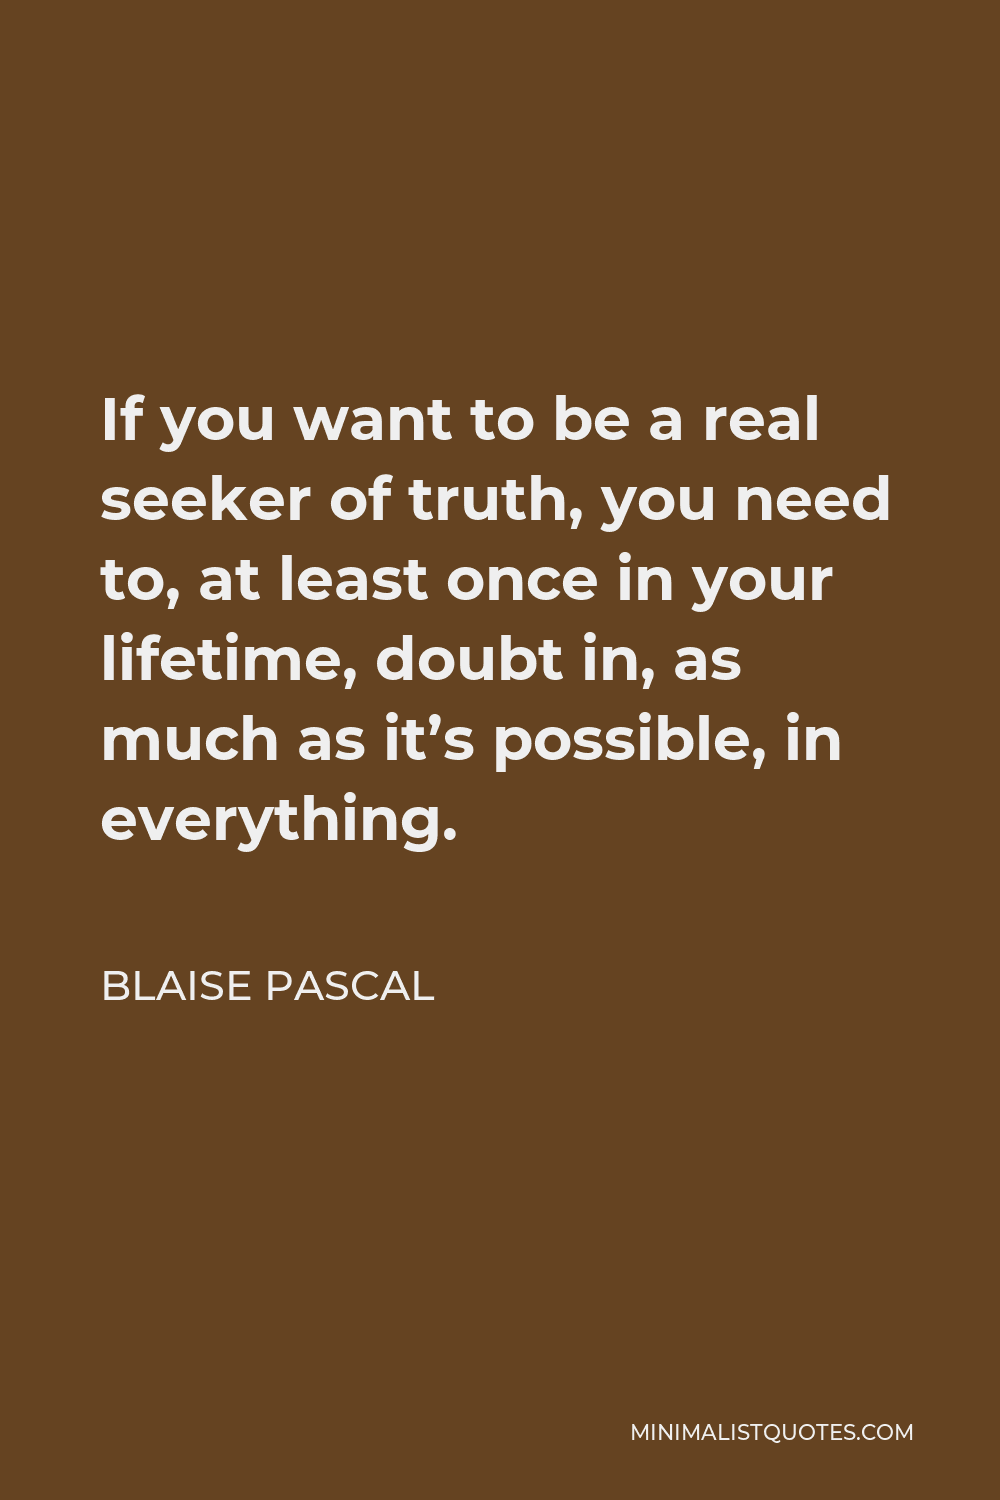 Blaise Pascal Quote - If you want to be a real seeker of truth, you need to, at least once in your lifetime, doubt in, as much as it’s possible, in everything.